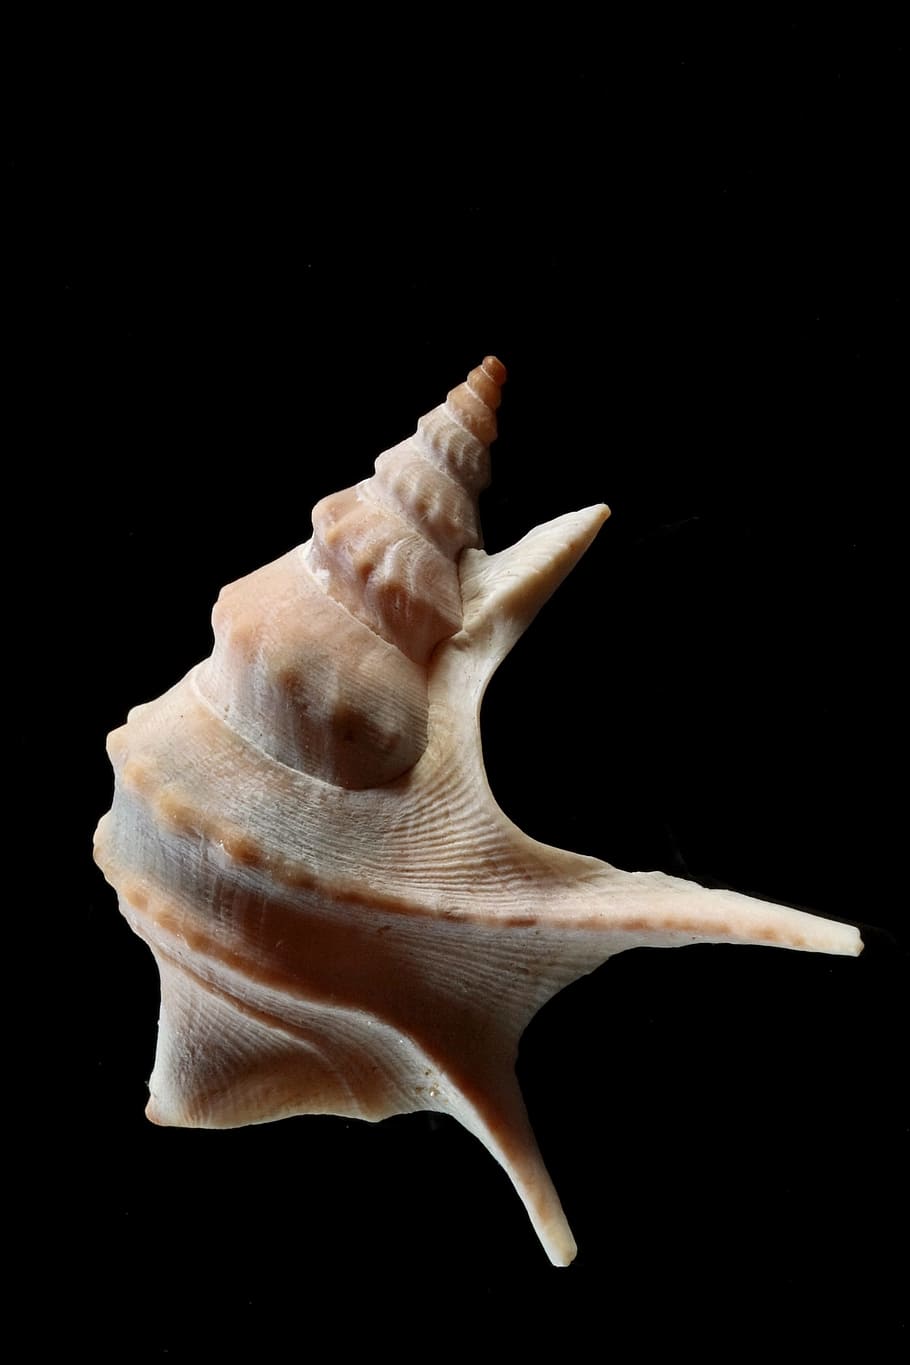 shell, snail, pelican foot, close, sea animal, black background, studio shot, indoors, close-up, food and drink